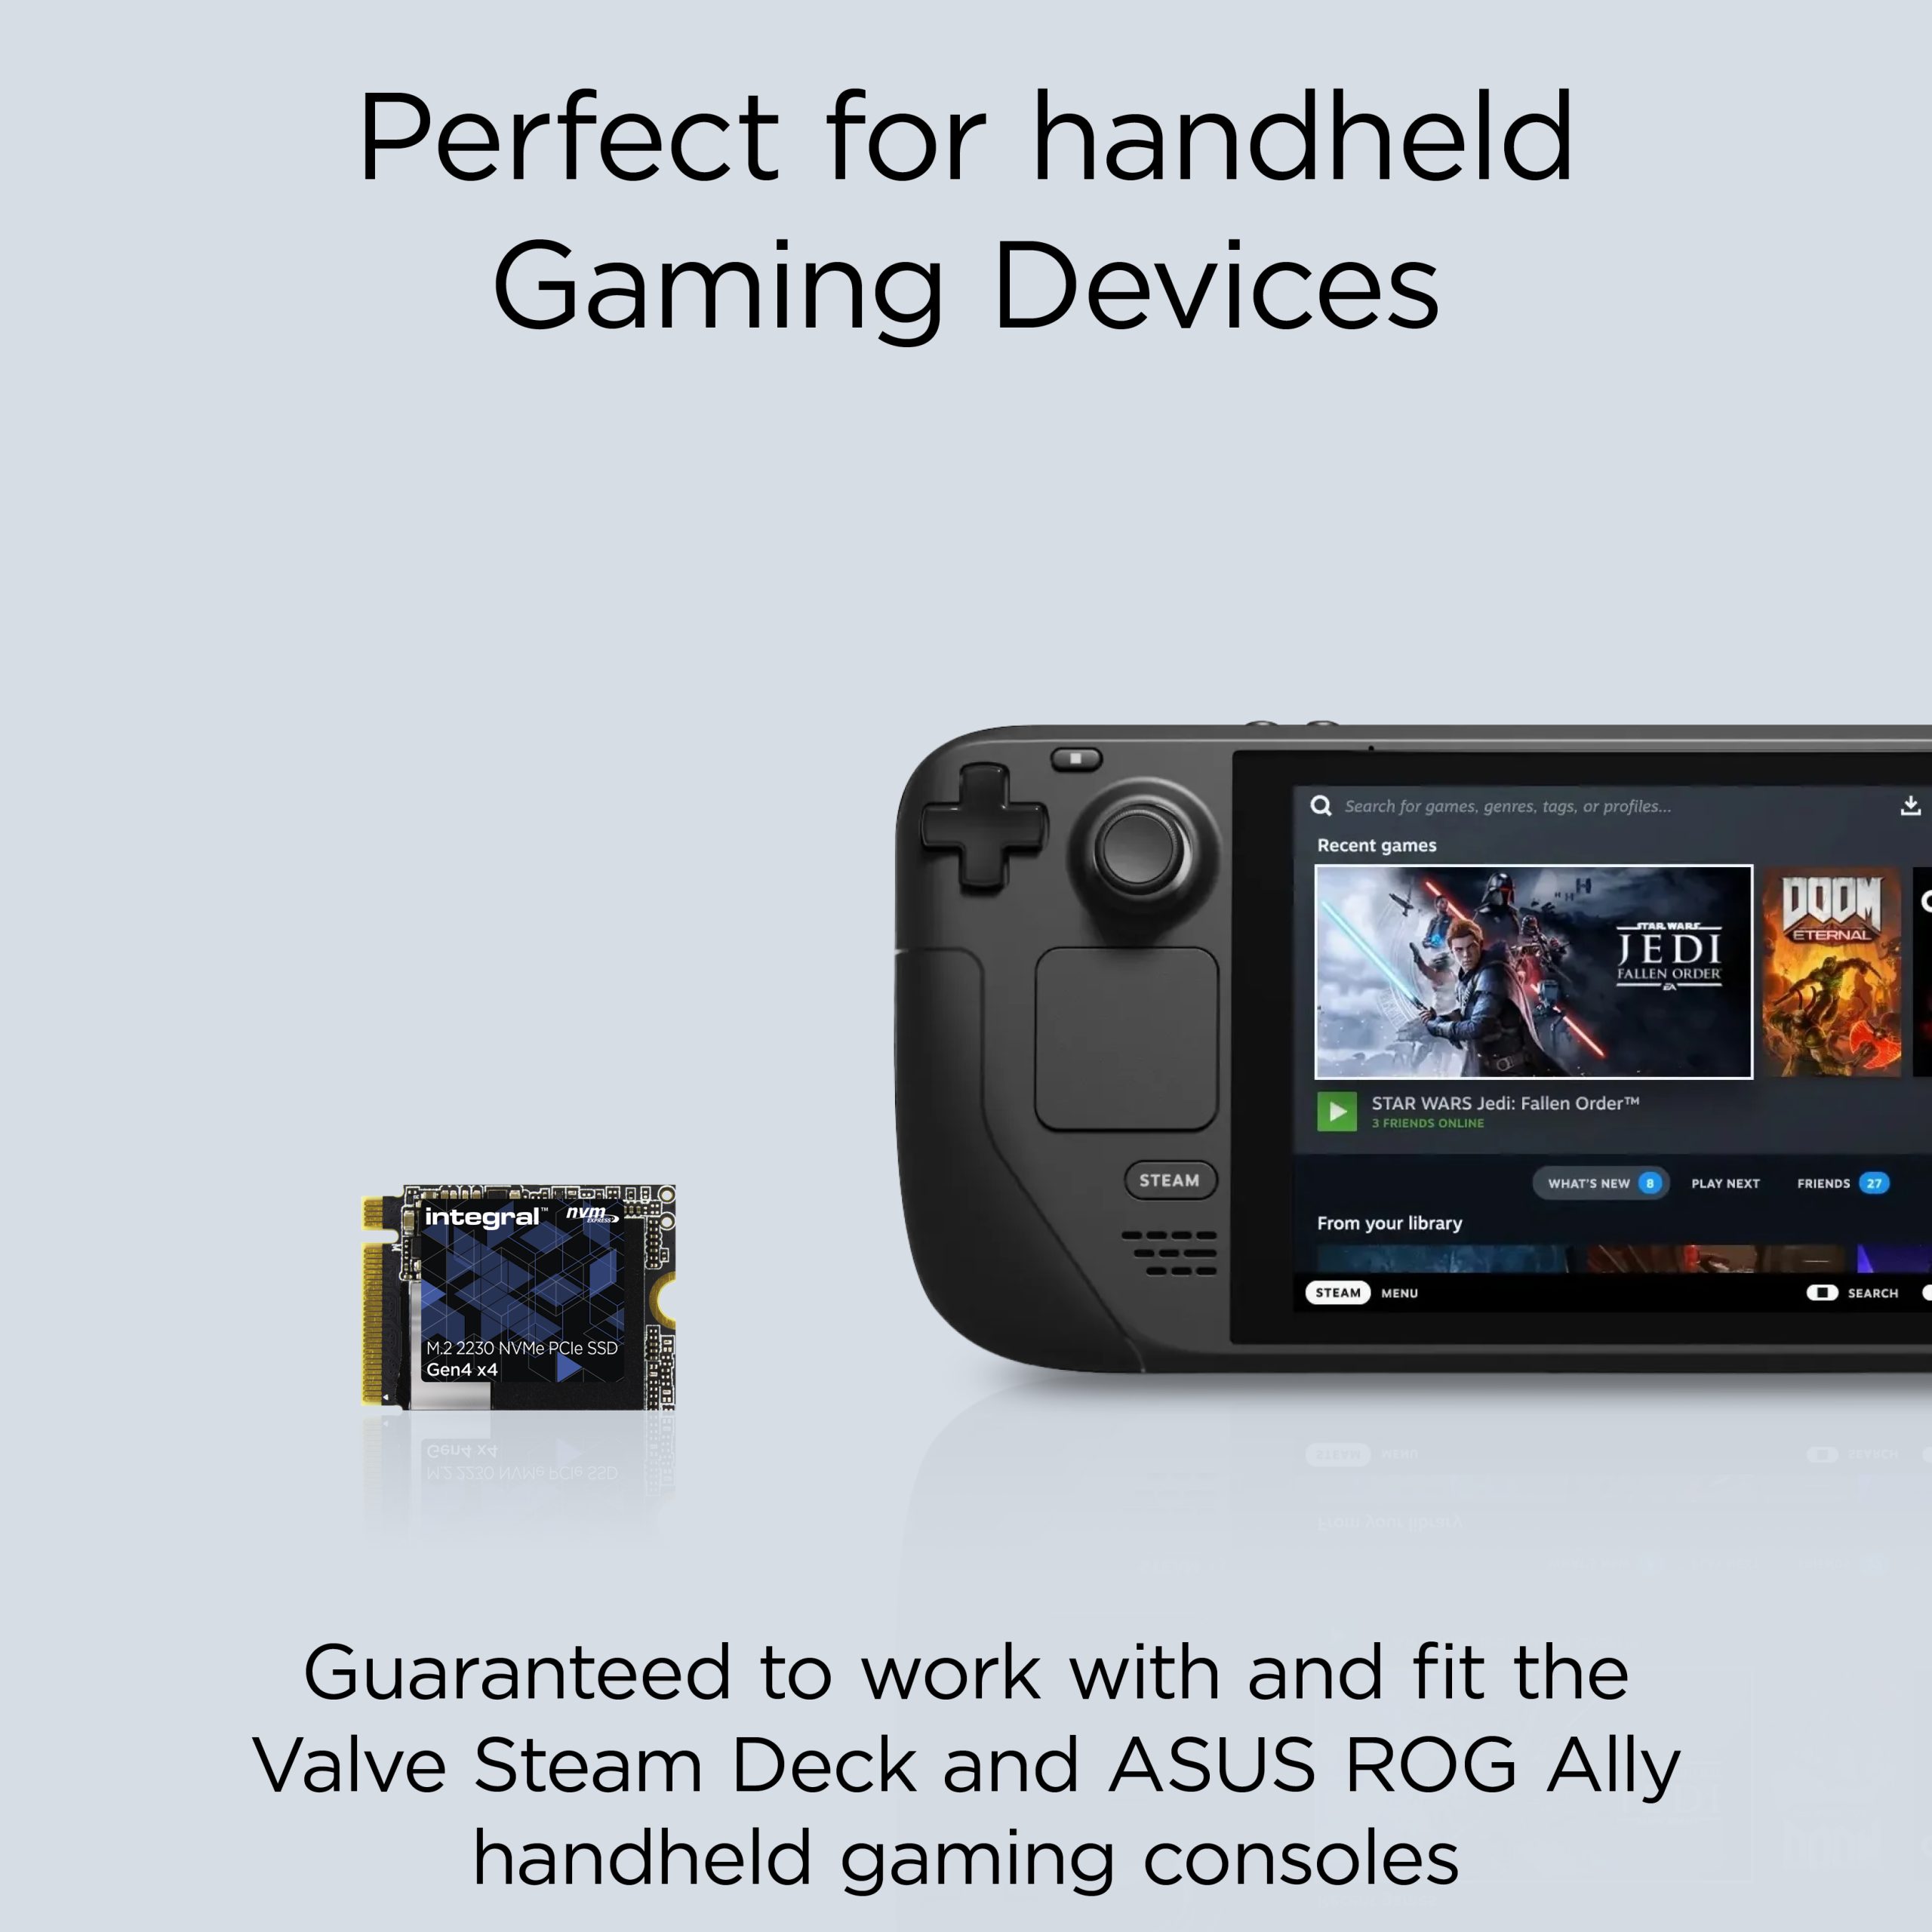 M.2 2230 SSD Gen4 Perfect For Gaming Guaranteed to work with and fit the Valve Steam Deck and ASUS ROG Ally handheld gaming consoles